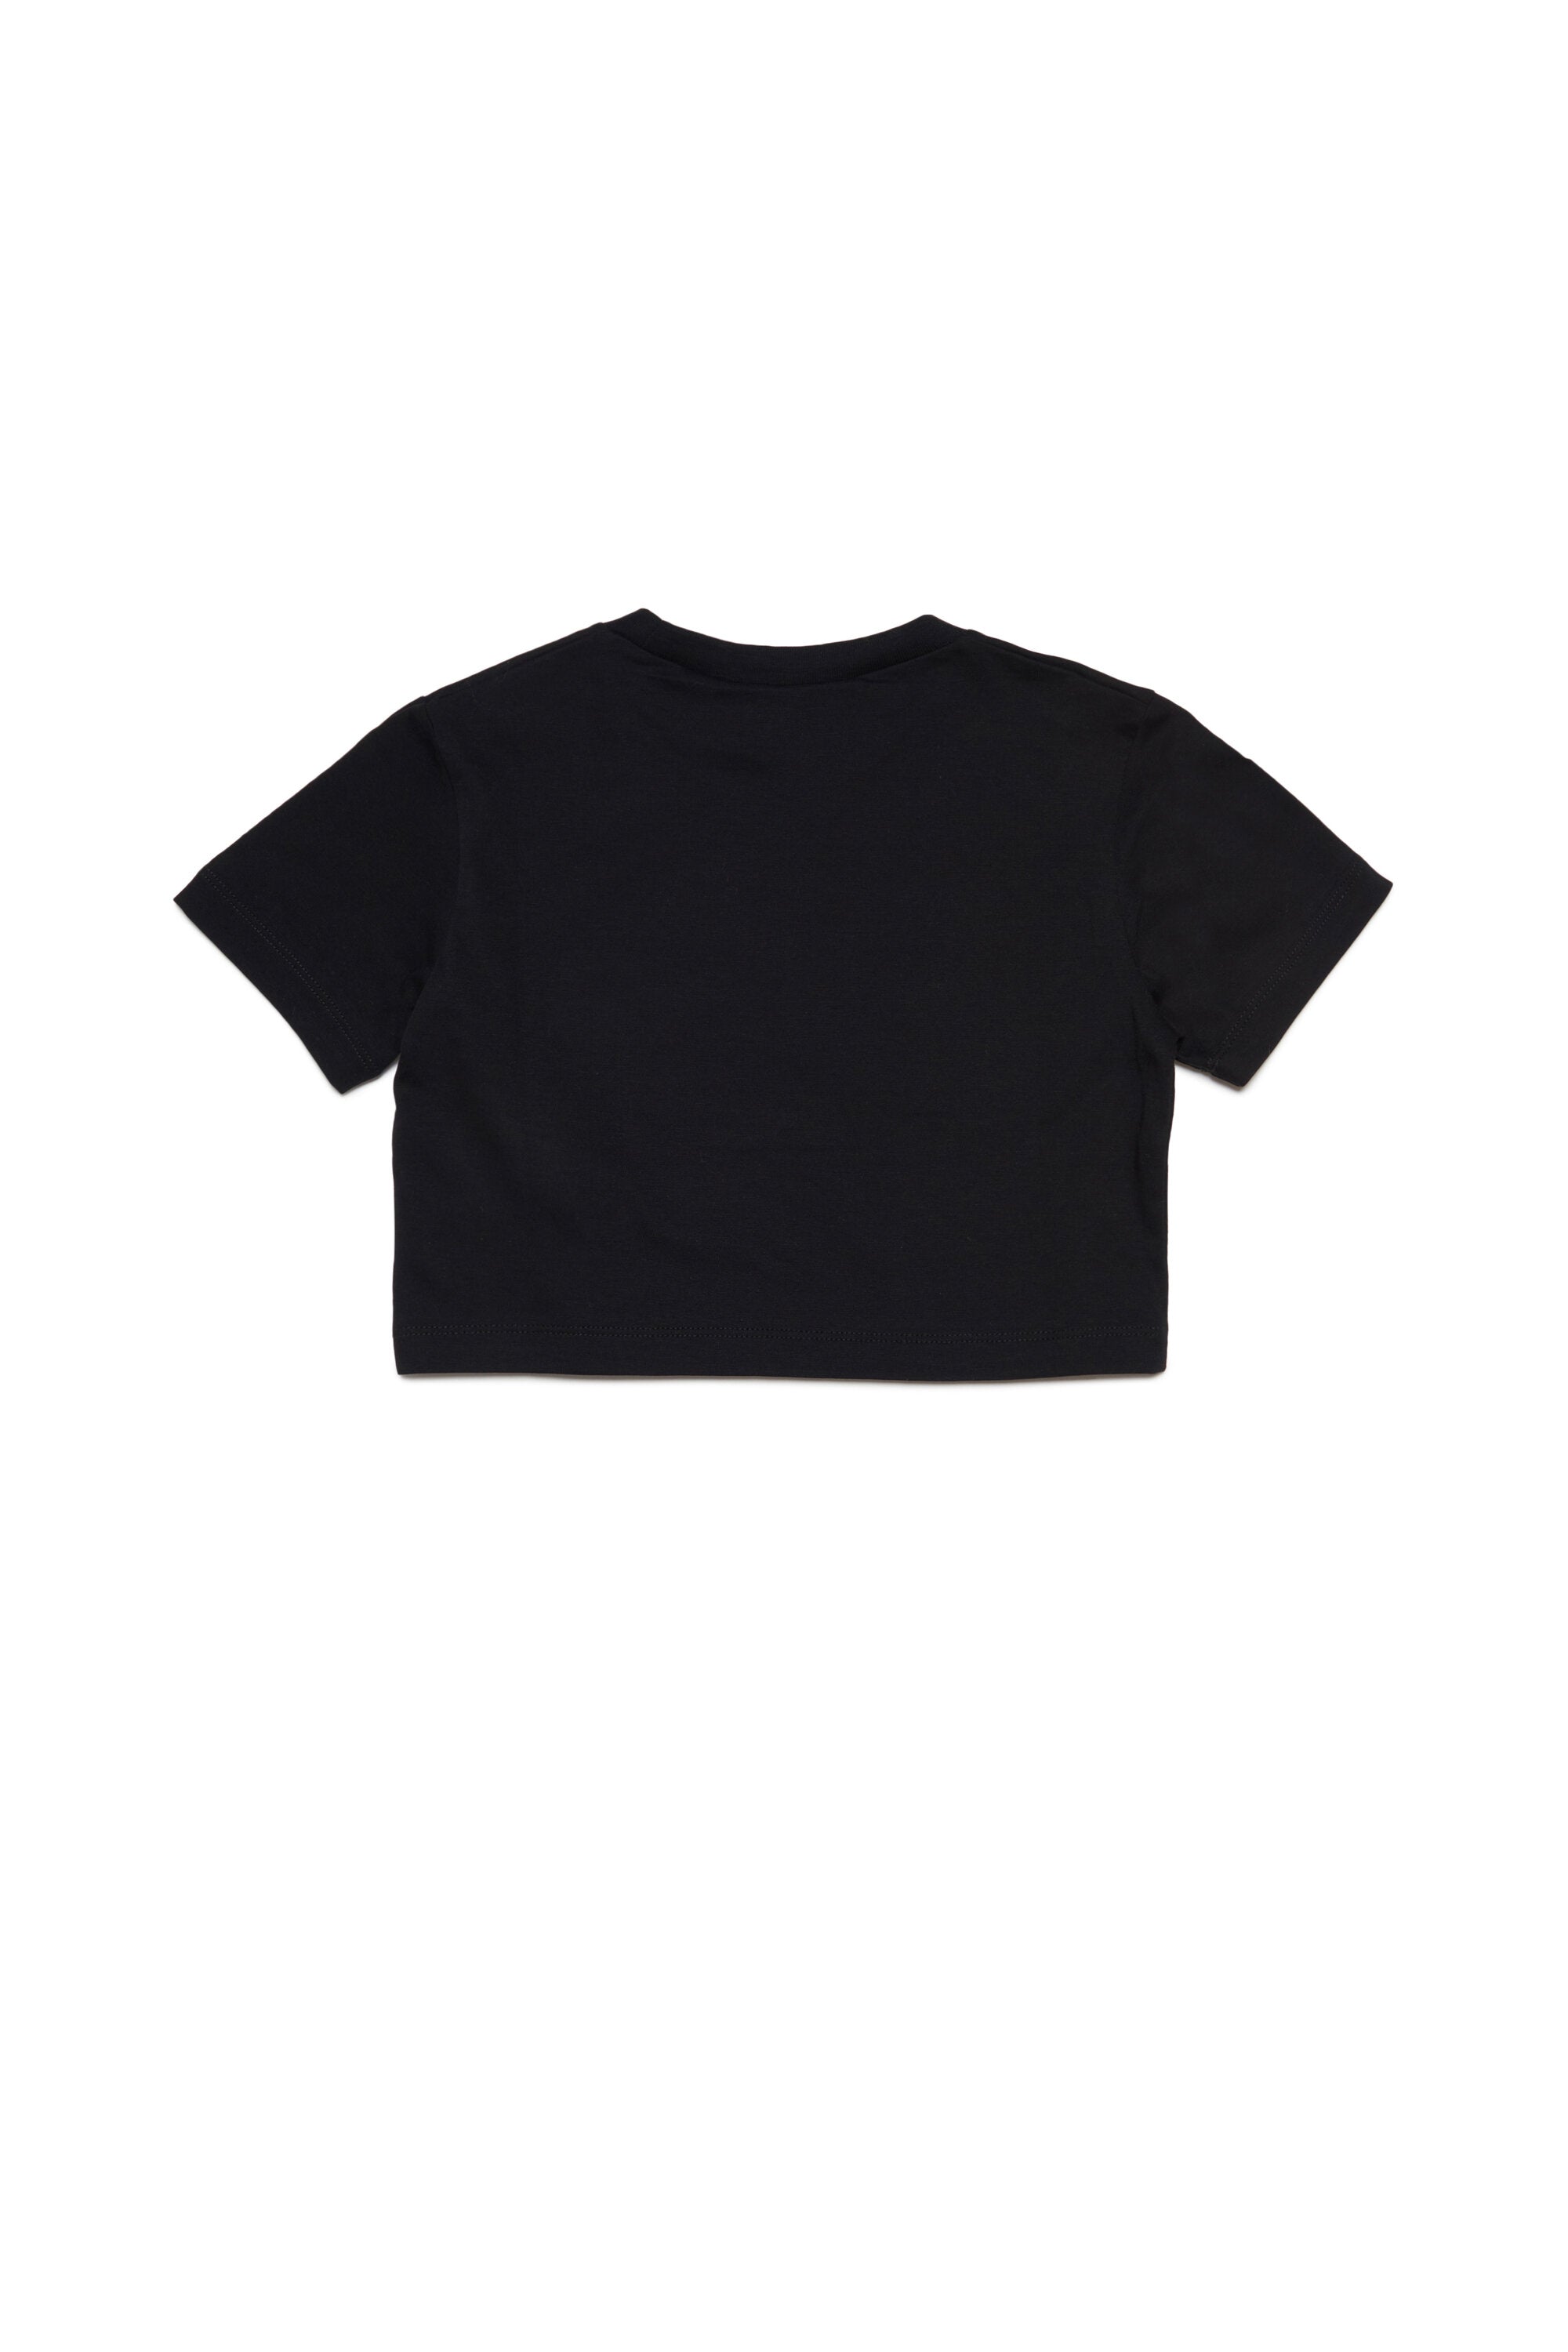 Cropped T-shirt branded with leaf graphics